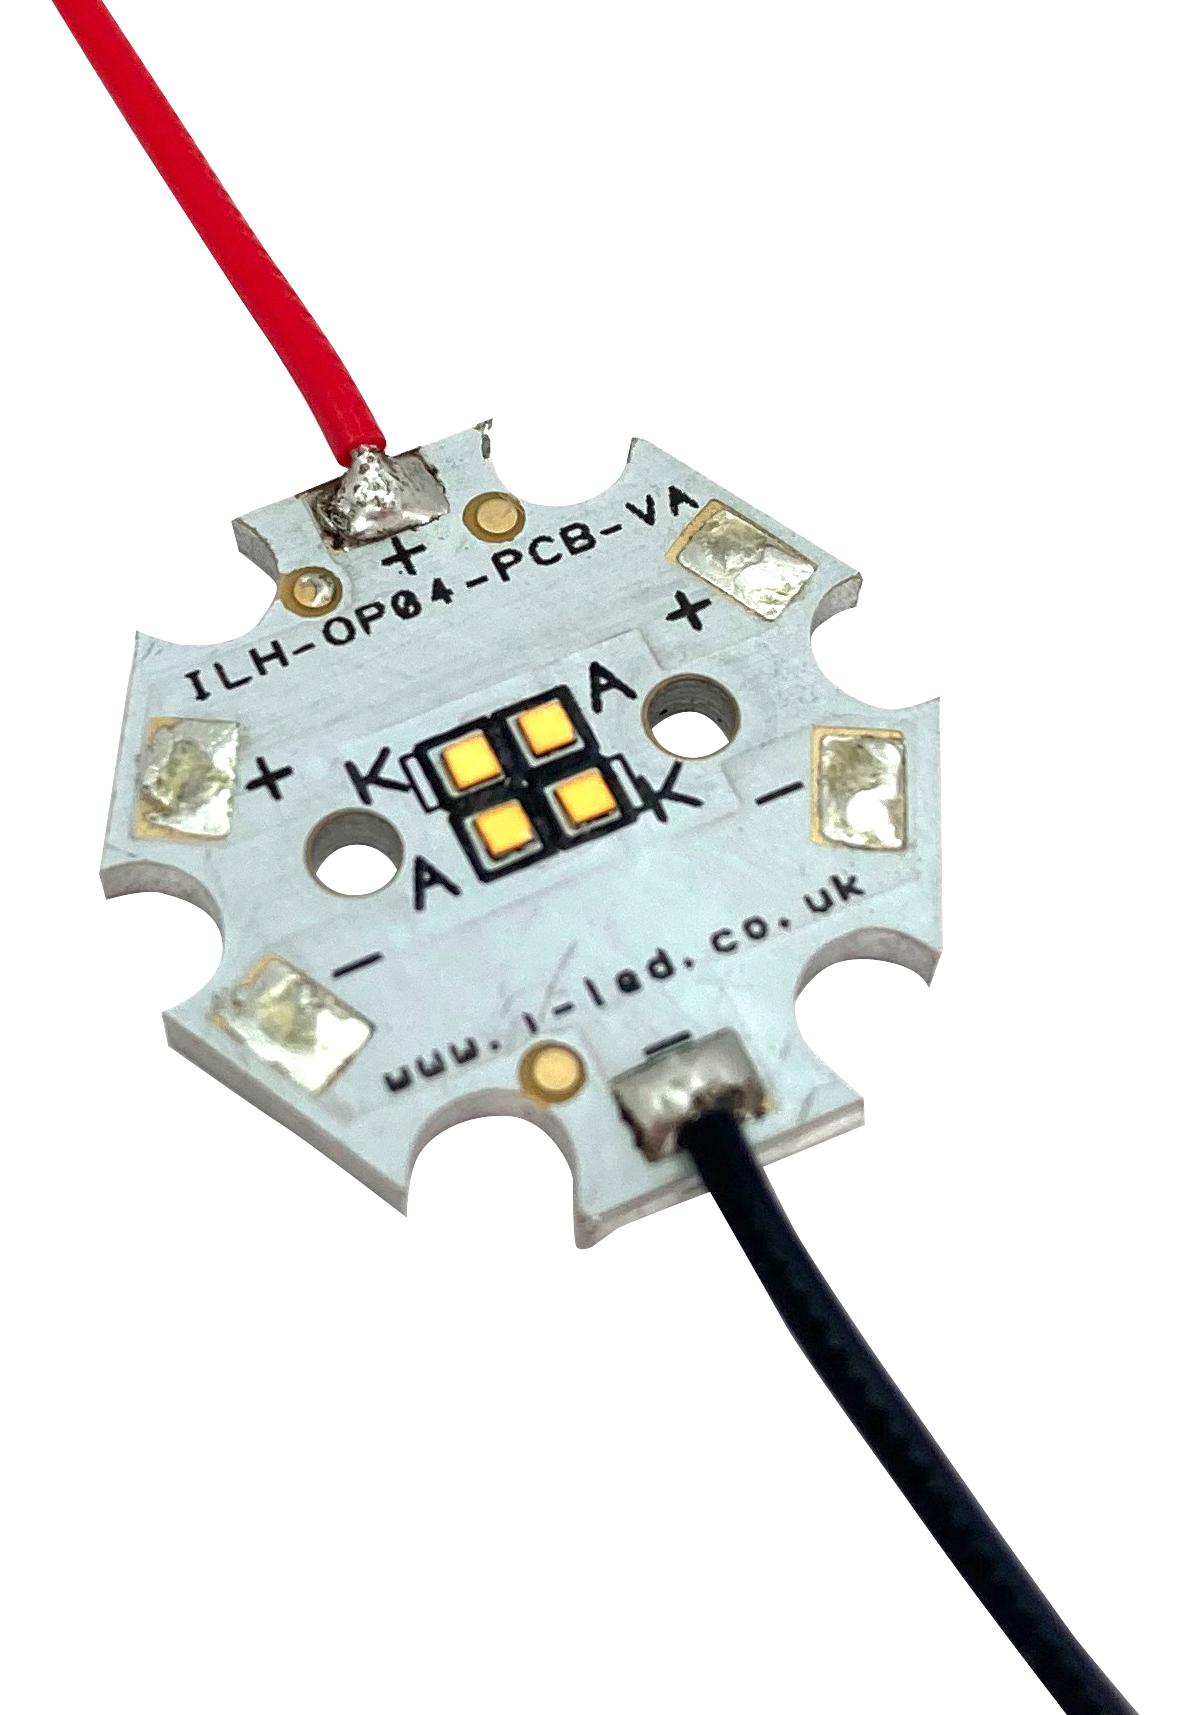 Intelligent Led Solutions Ilh-Op04-Pcre-Sc221-Wir200. Led Module, Red, 174Lm, 630Nm, Star